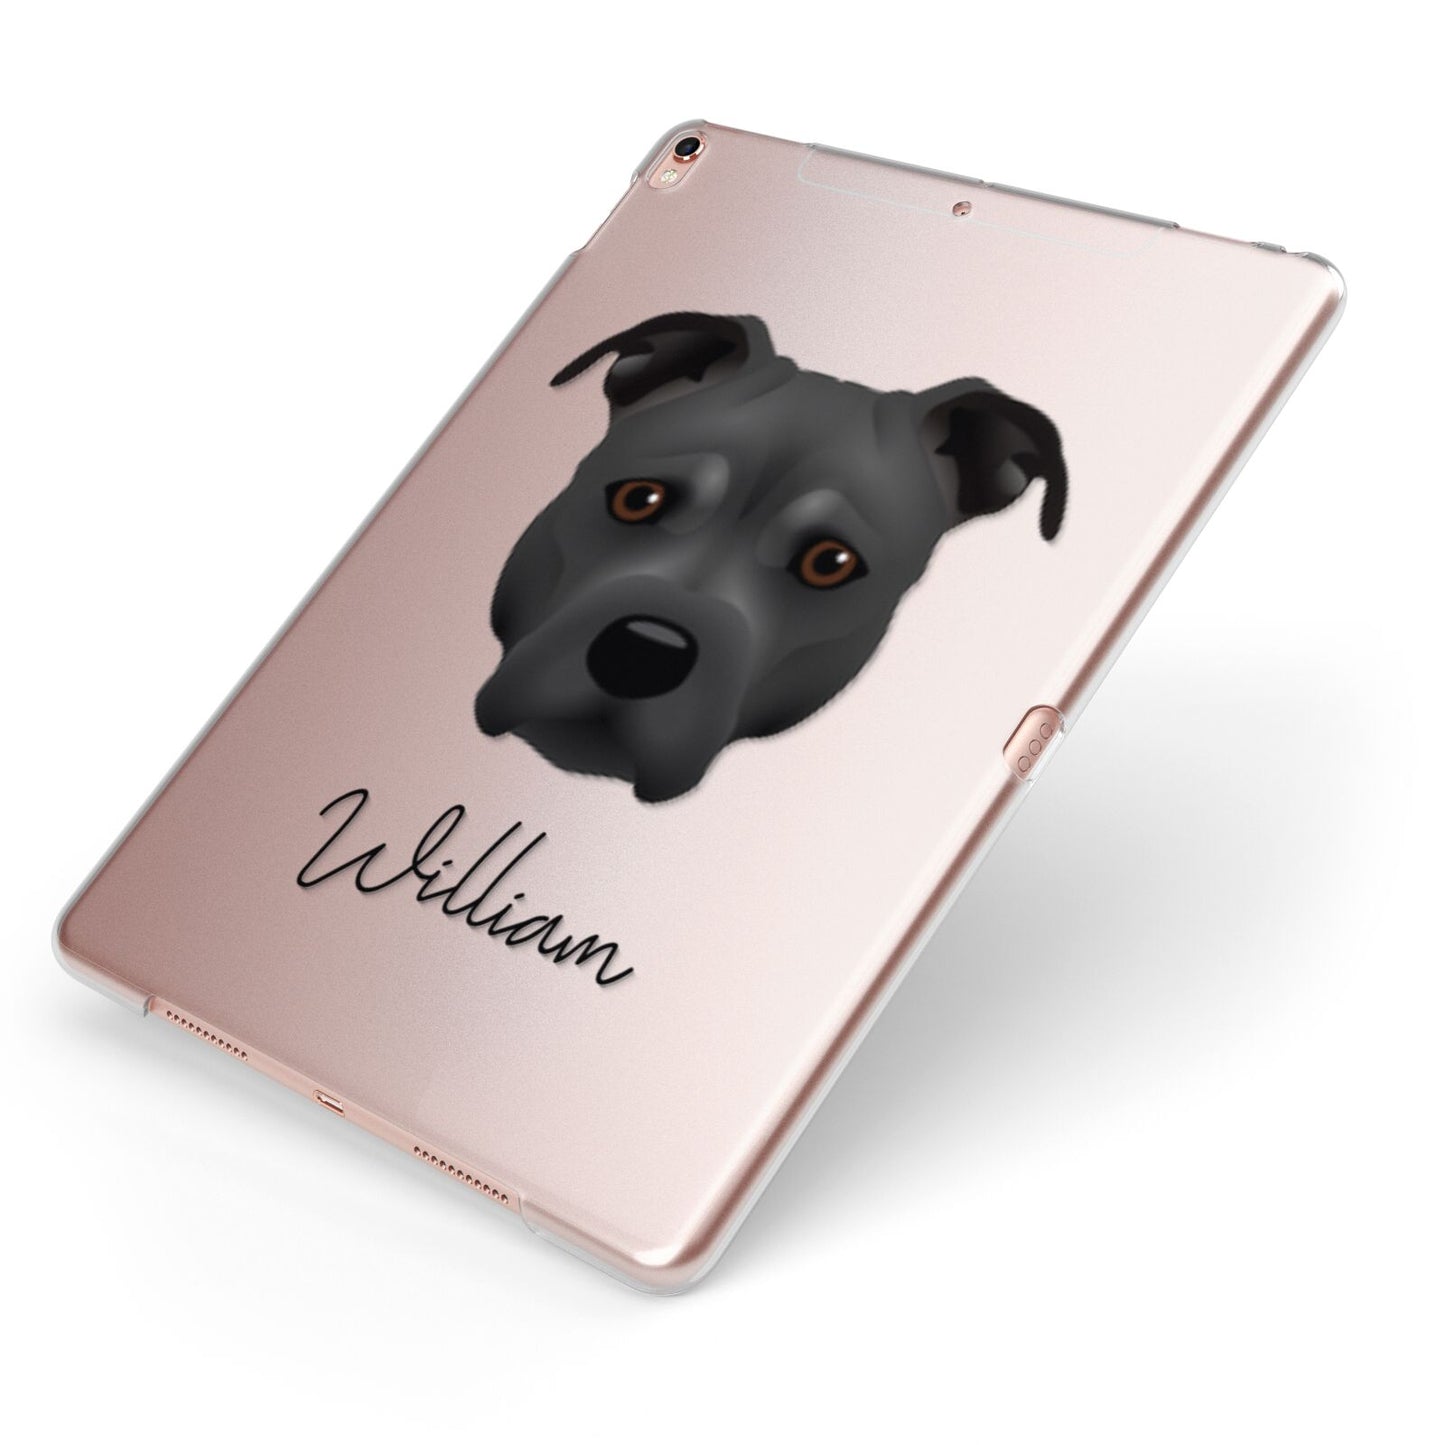 Staffordshire Bull Terrier Personalised Apple iPad Case on Rose Gold iPad Side View